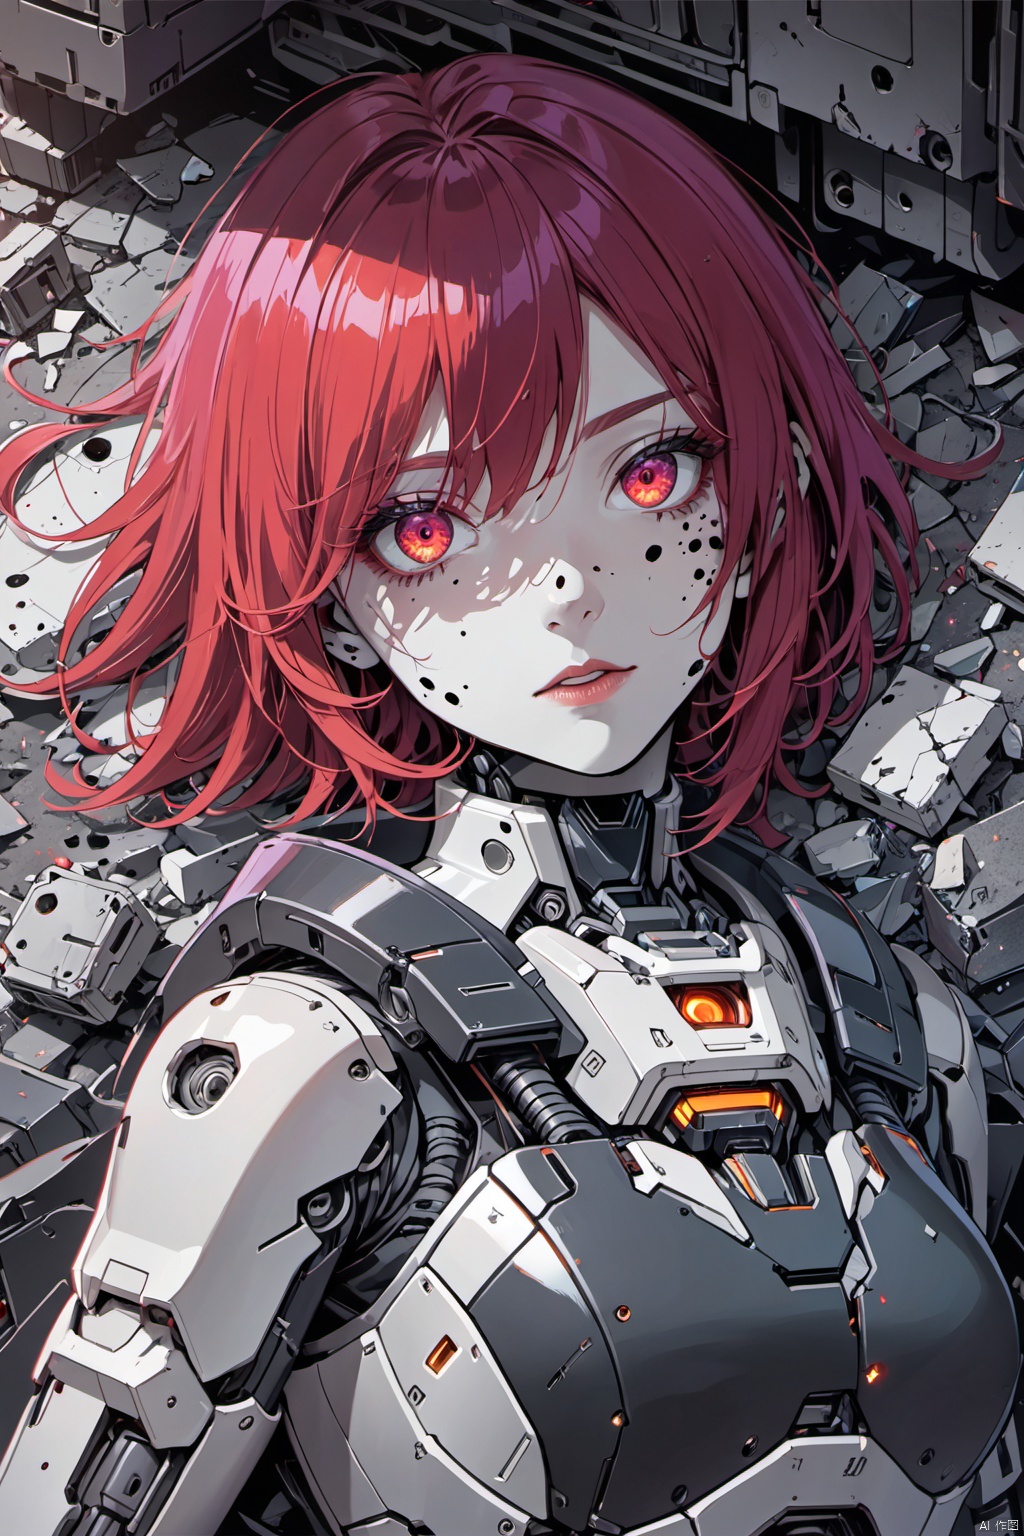  upper half of a broken semi-mechanical girl lying in landfill, (best quality, 4k, 8k, highres, masterpiece:1.2), ultra-detailed, , beautiful detailed eyes, beautiful detailed lips, extremely detailed eyes and face, (longeyelashes), short and flowing red hair, red-eyed robot, shattered body full of fear and holes, half-android face, (laying on ground in calmness:1.2), hyperpunk scene with unsaturated deep reds and purples, vibrant and vivid colors, (vacation, high resolution:1.3), (zoom-in, ultra-fine painting, 2D anime:1.2), art by Yukito Kishiro, Lida, robotic decay, dystopian atmosphere, saturated, sci-fi trash, glowing mechanical eye, harsh shadows, dark clouds above,(low quality, normal quality, worst quality, jpeg artifacts), cropped, monochrome, lowres, low saturation, ((watermark)), (white letters), (Low quality, Normal quality, Worst Quality, jpeg artifact), Cropping, Monochrome, Low resolution, Low Saturation, (watermark), (white letters), Skin spots, Acne, Skin blemishes, lida